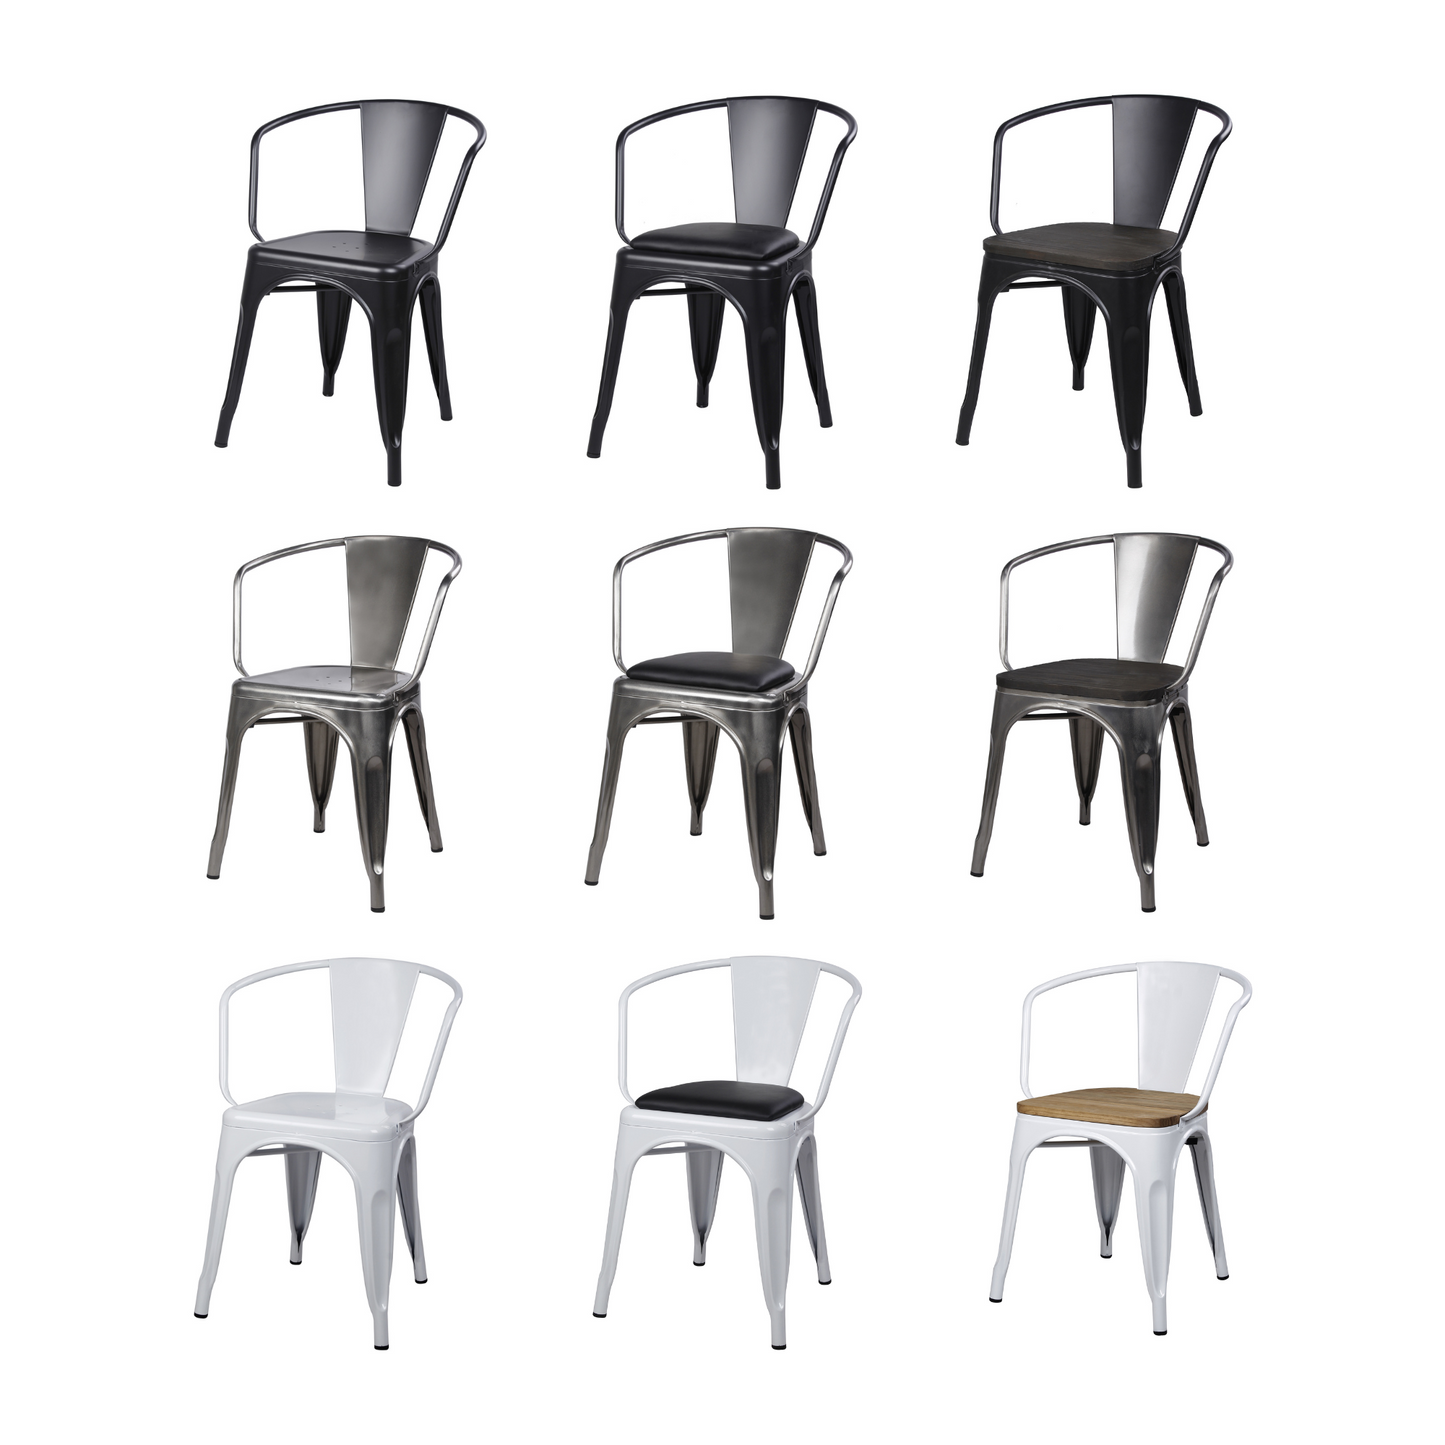 Wholesale Metal Chair - AY52 - OEM Service Available